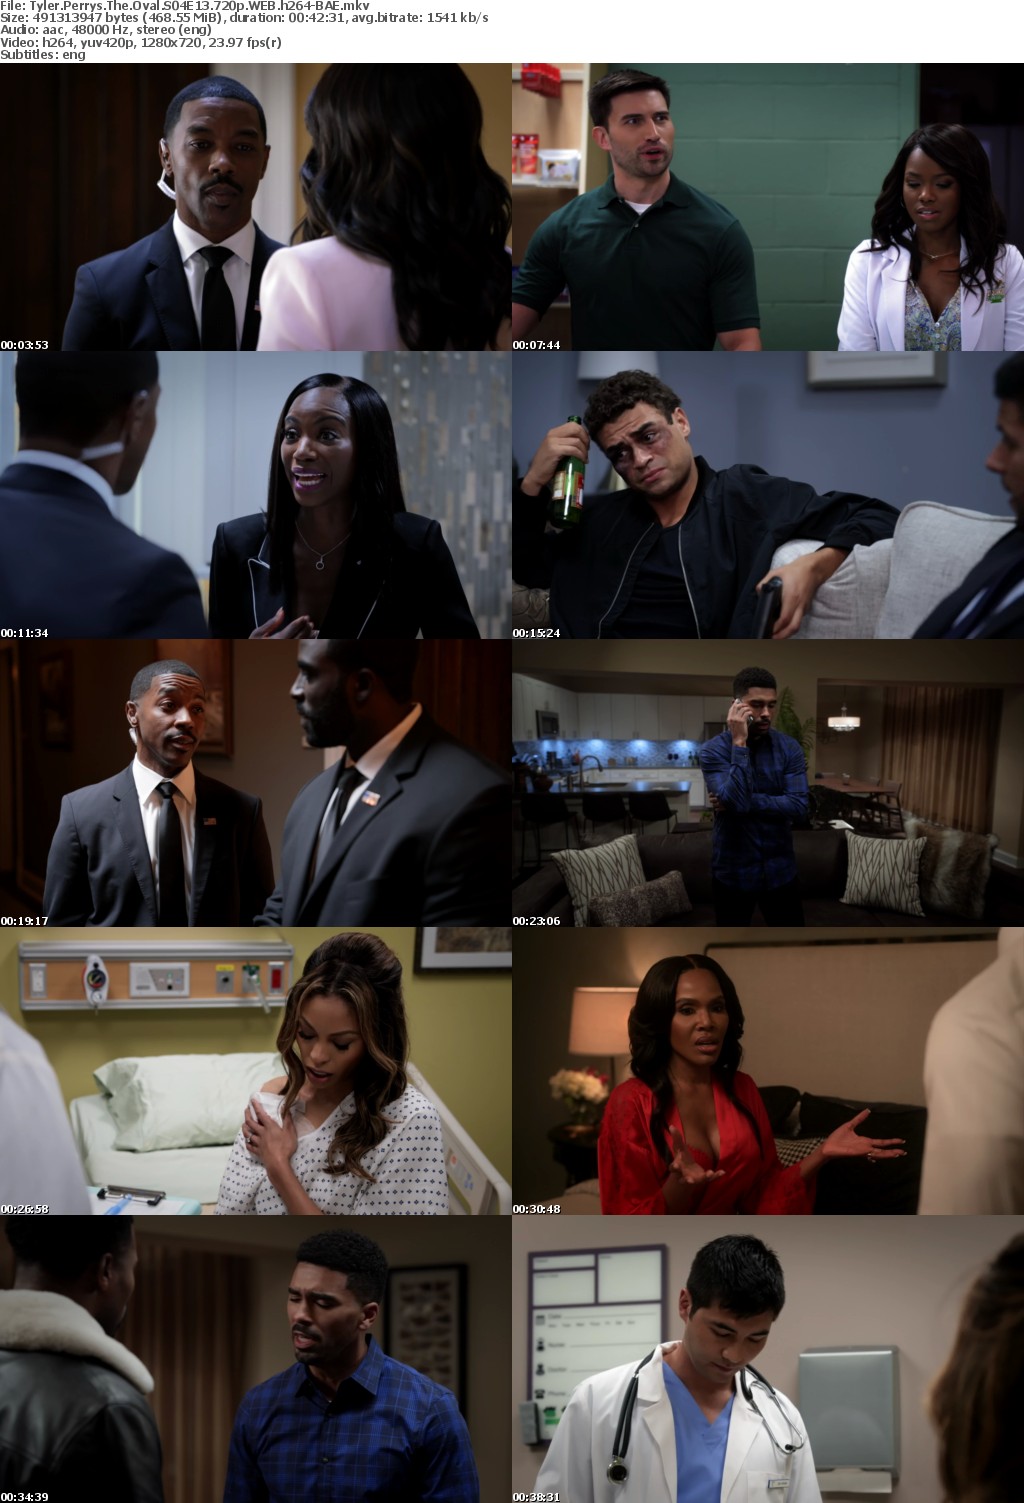 Tyler Perrys The Oval S04E13 720p WEB h264-BAE